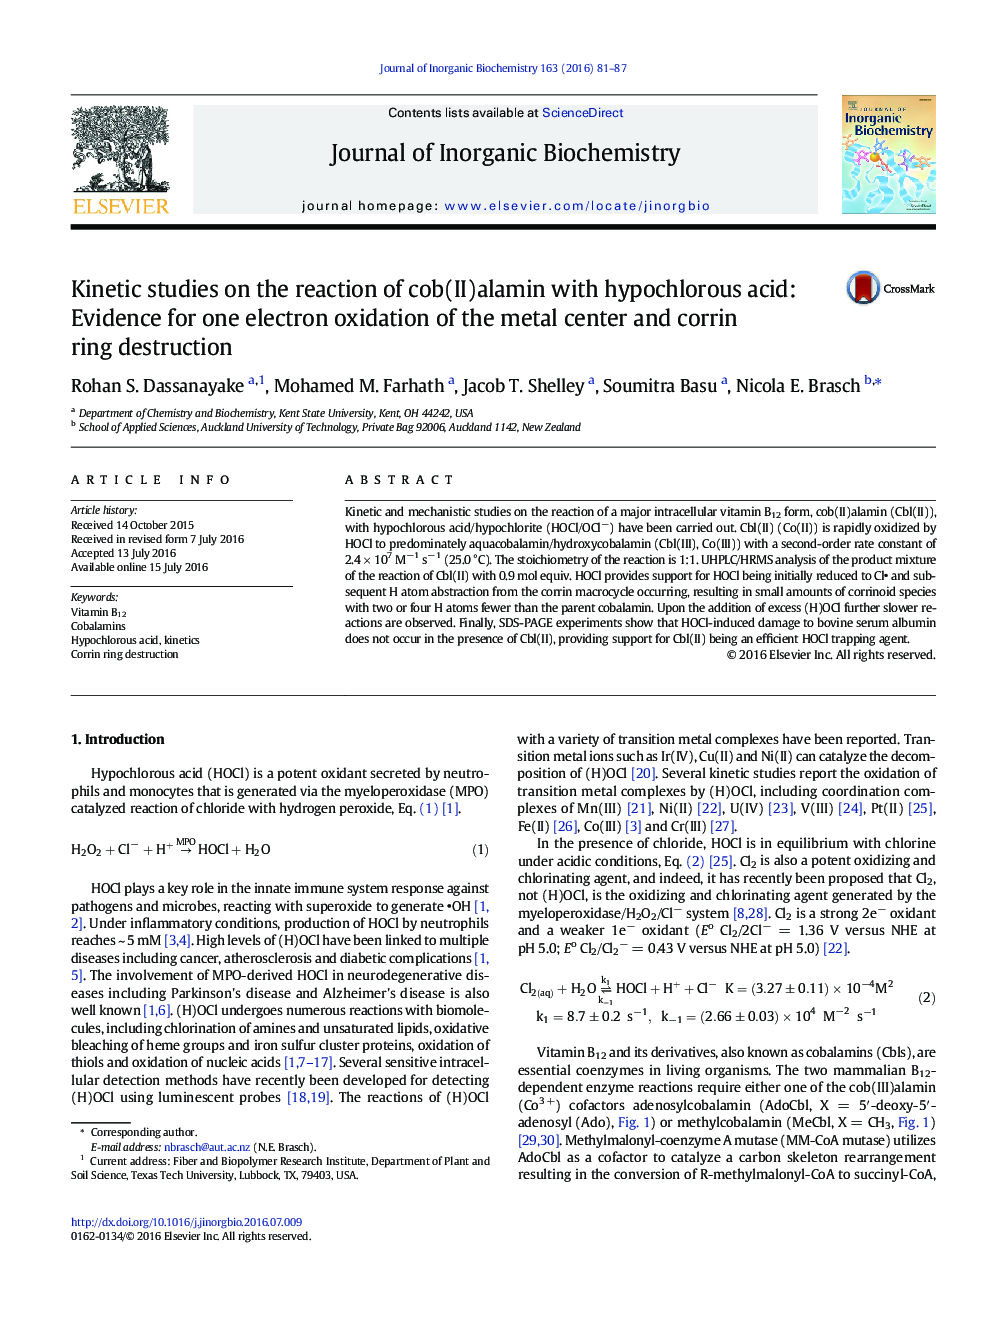 Kinetic studies on the reaction of cob(II)alamin with hypochlorous acid: Evidence for one electron oxidation of the metal center and corrin ring destruction